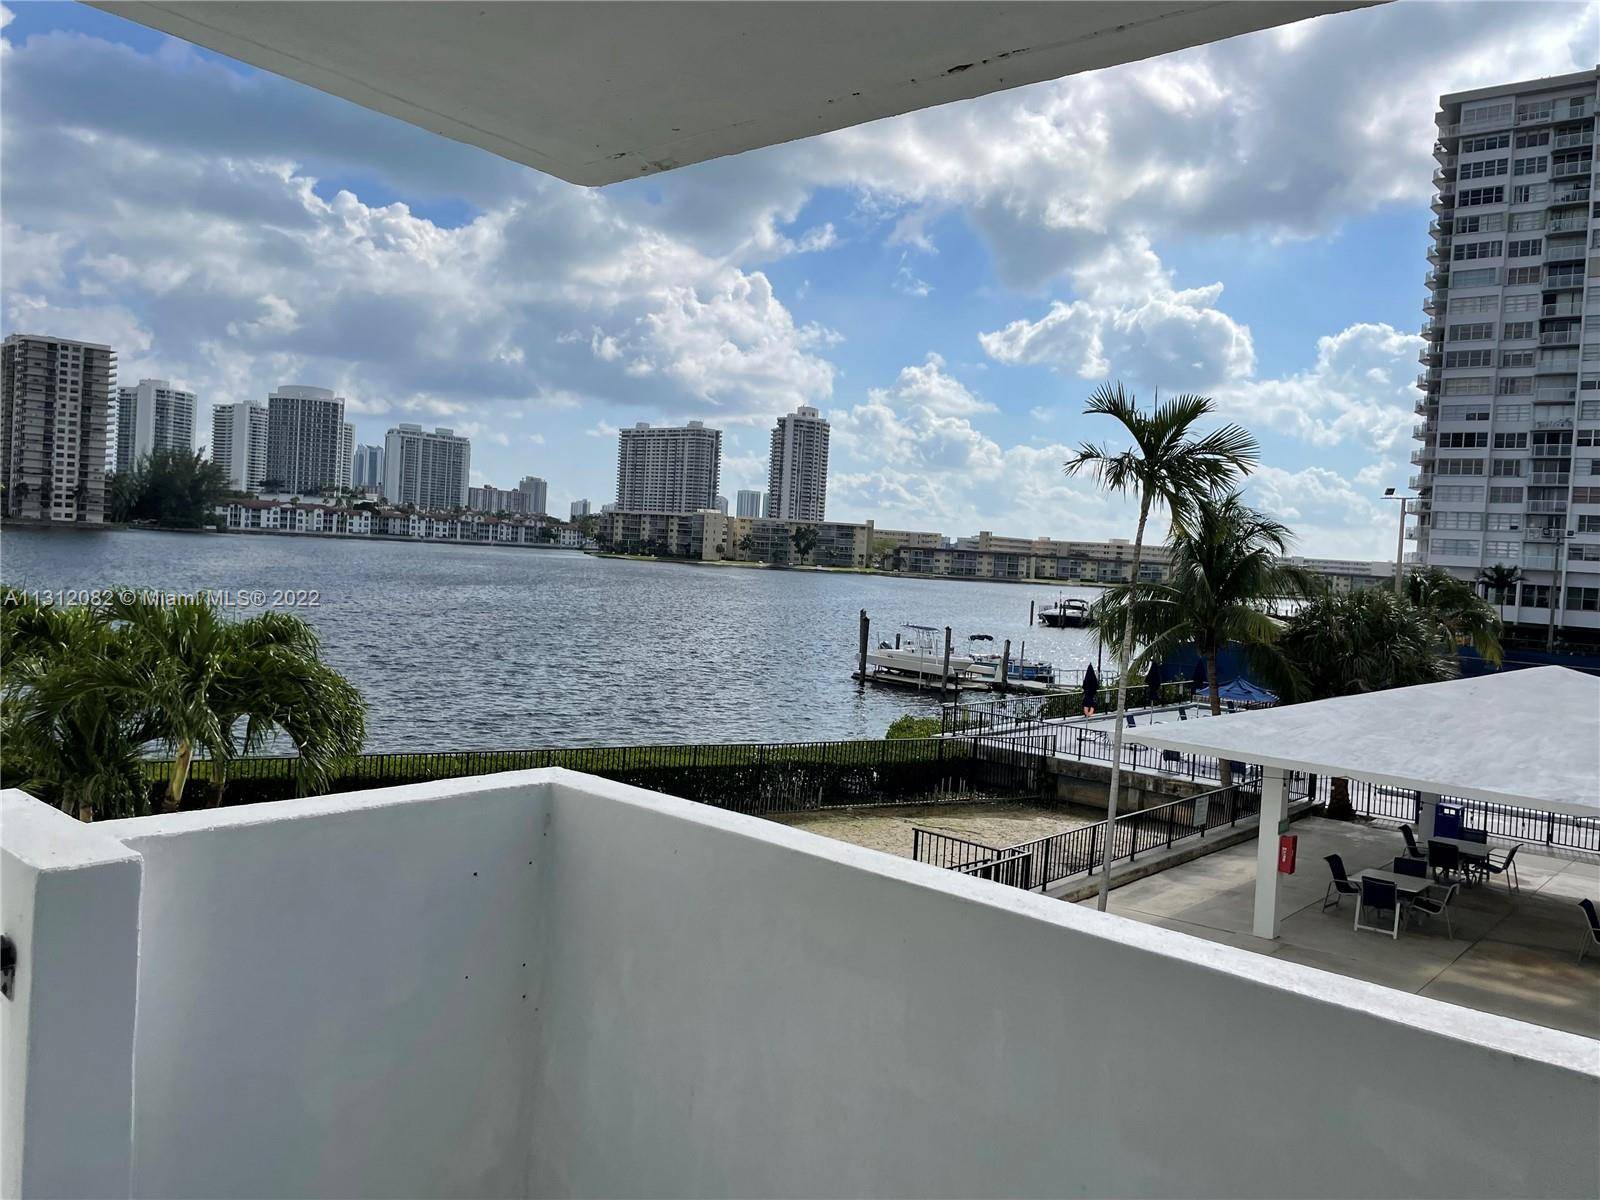 The best Location ! Beautiful Waterfront 2 BR 2BA Condo with Amazing View of the Bay and Williams Island.